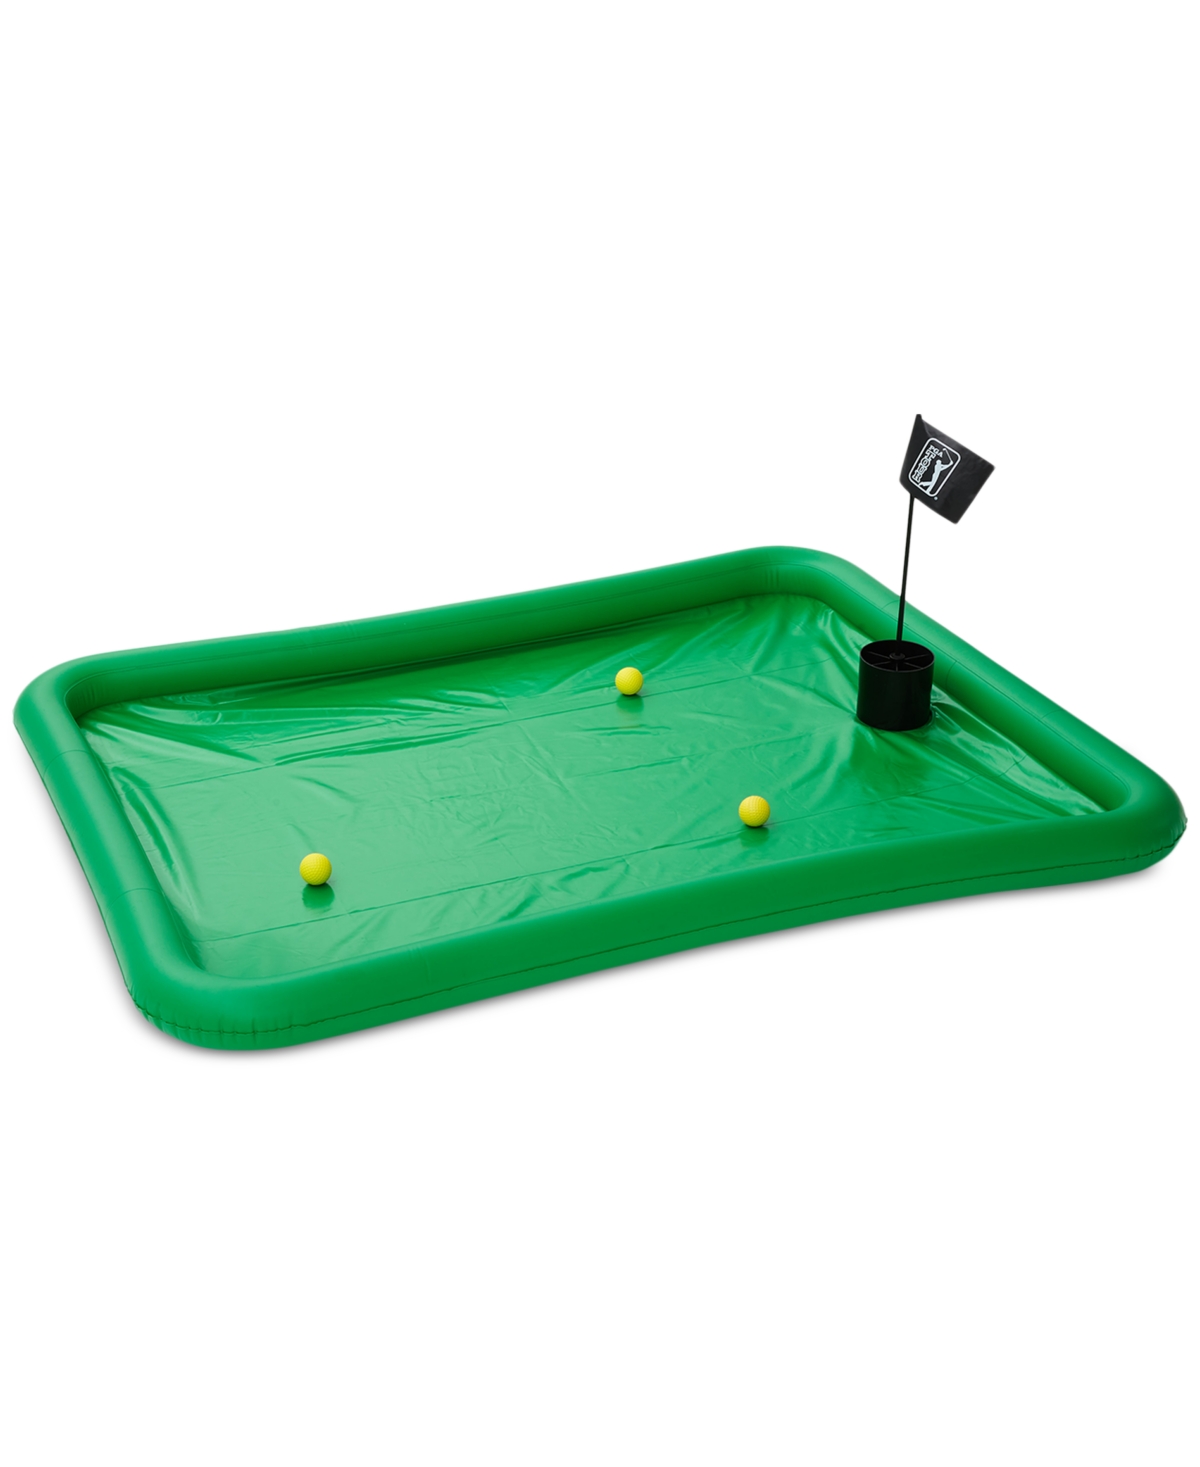 Pga Tour Floating Golf Green For Pool In Caviar